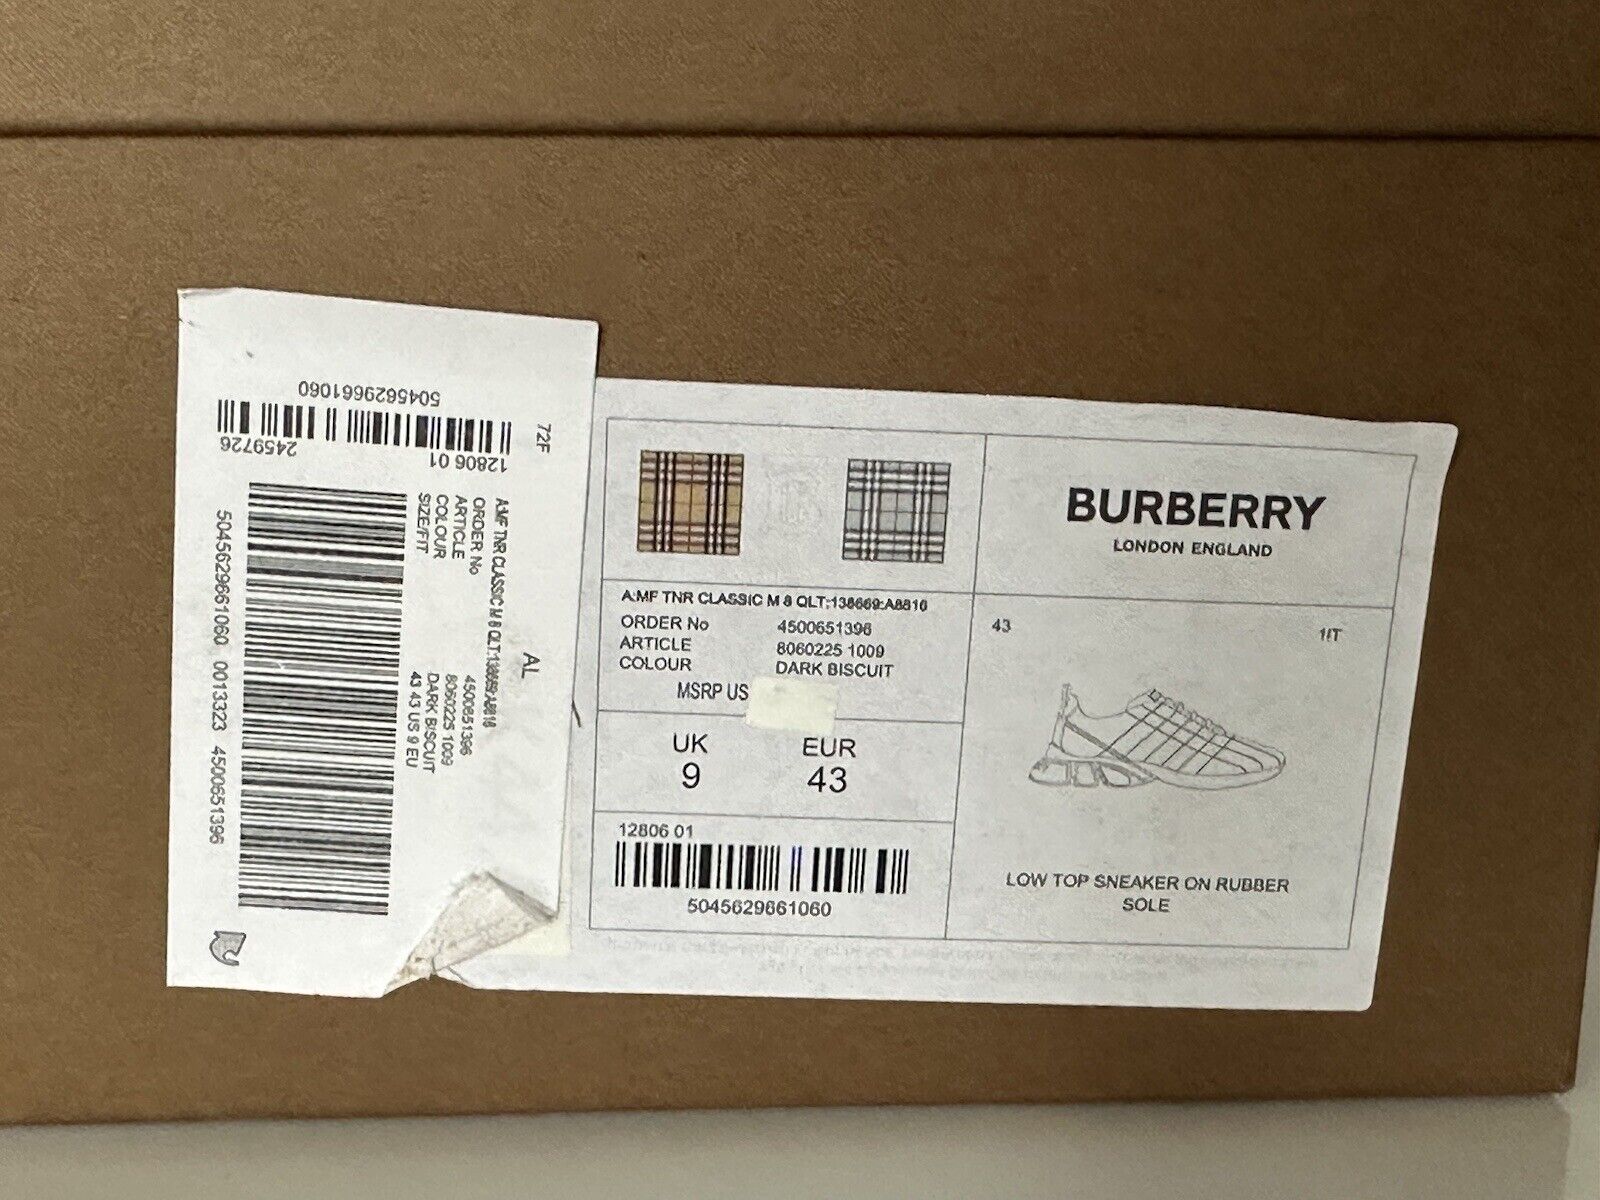 NIB $850 Burberry Quilted Dark Biscuit Leather Sneakers 10 US (43 Eu) 8060225 IT